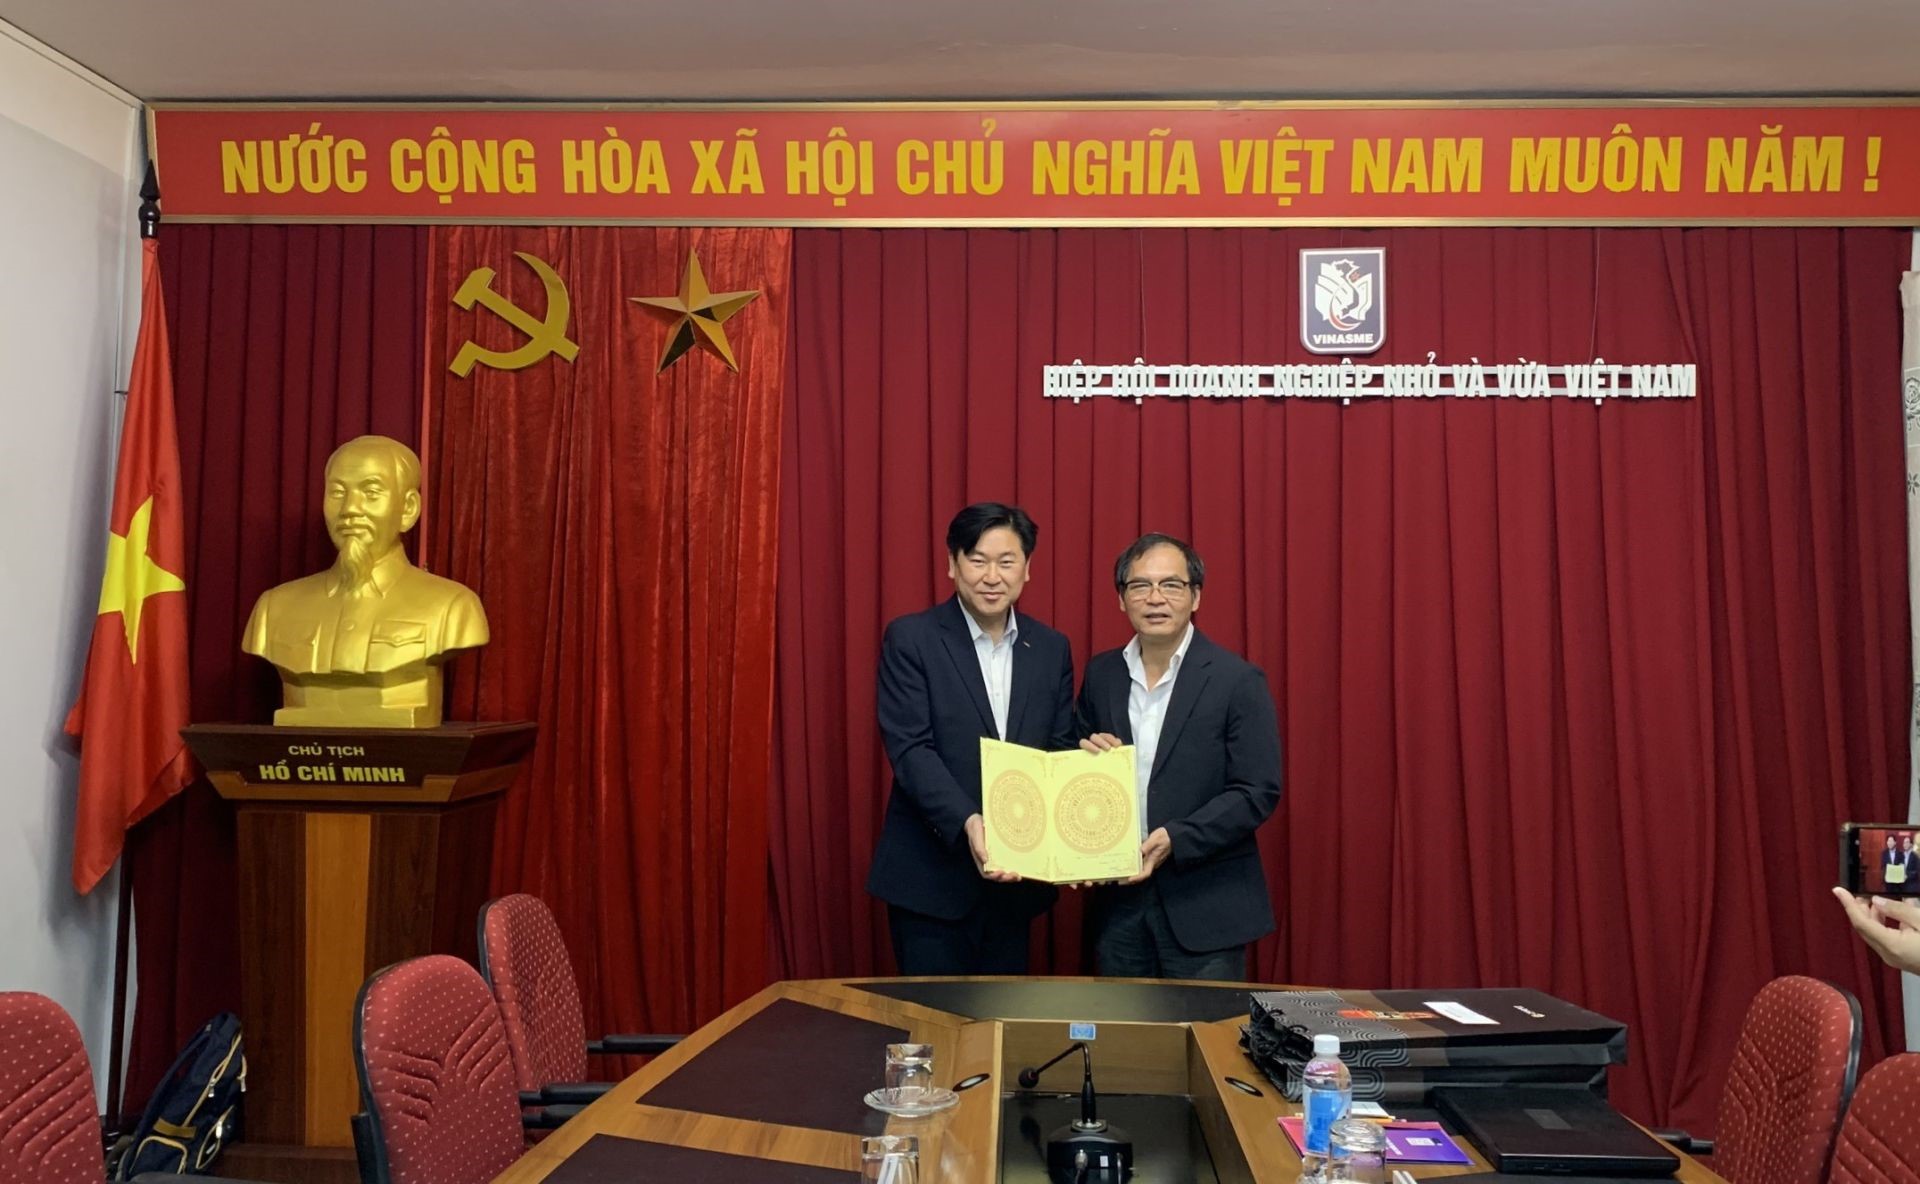 Dr. To Hoai Nam took a commemorative photo with Mr. Yu Byung Wook.